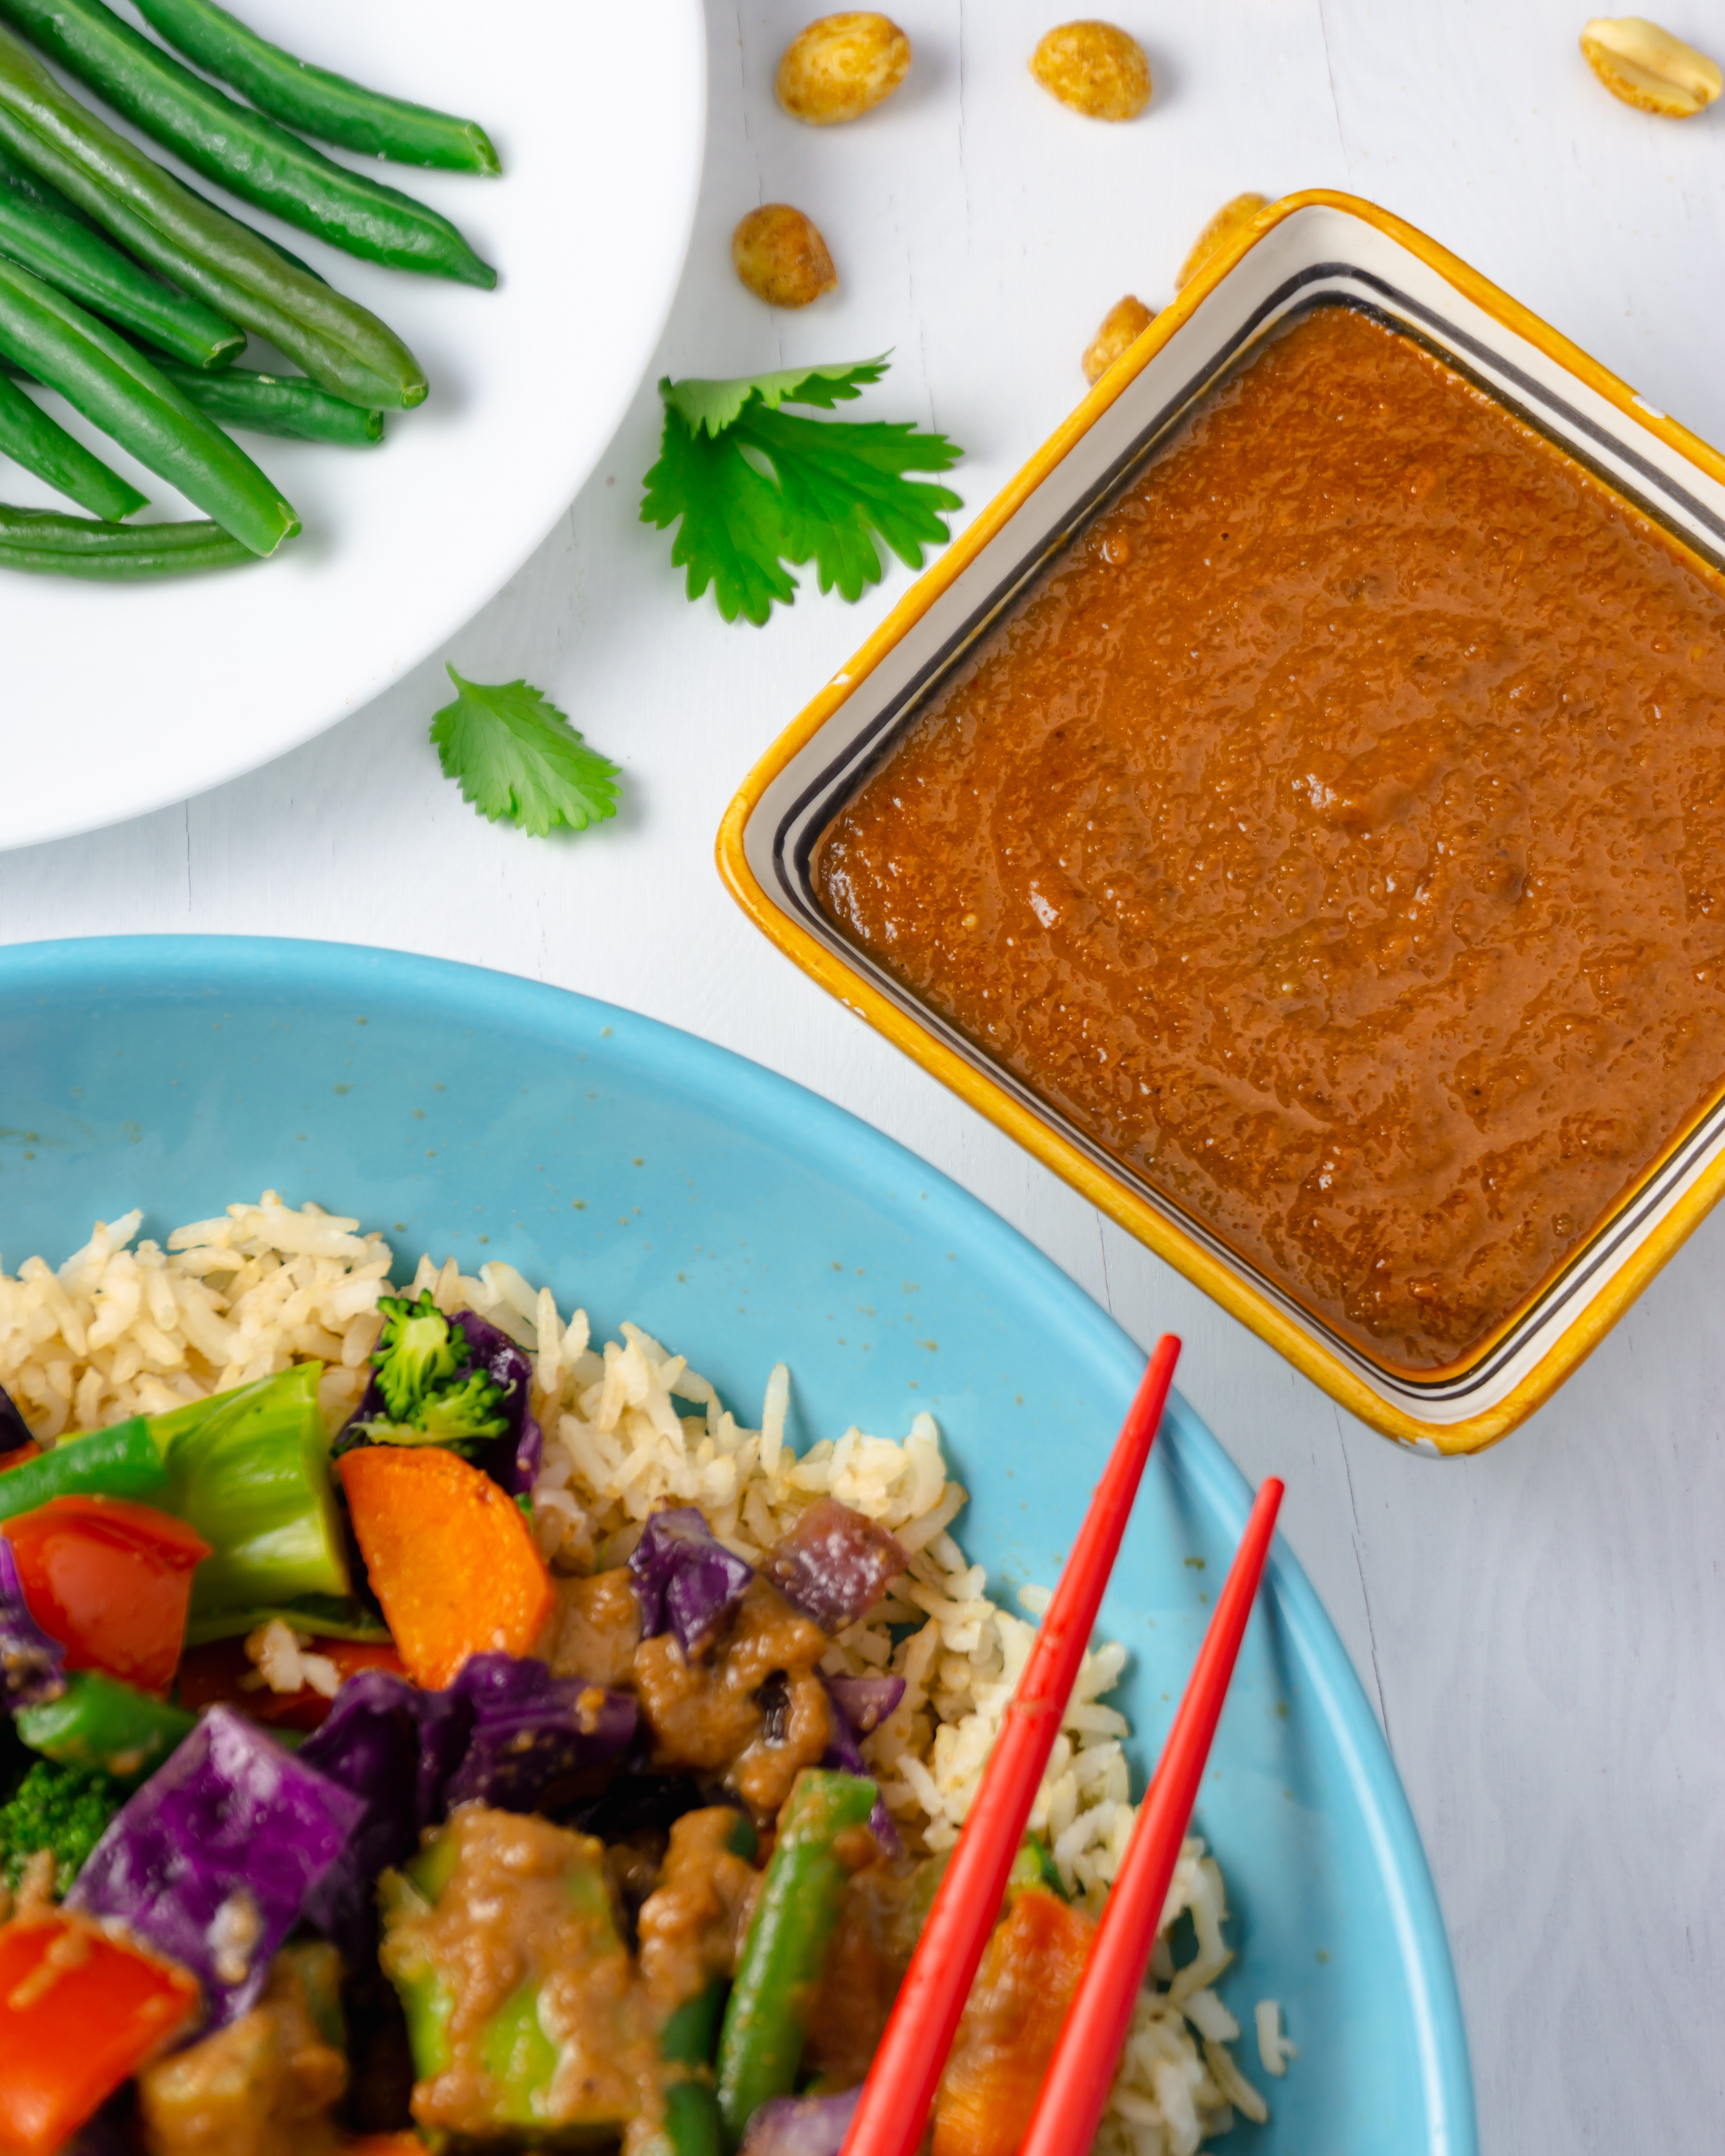 Lo Cal. Stir Fry Sauce - Make Your Own Healthy Stir Fry Sauce At Only 26 Calories Per Serve